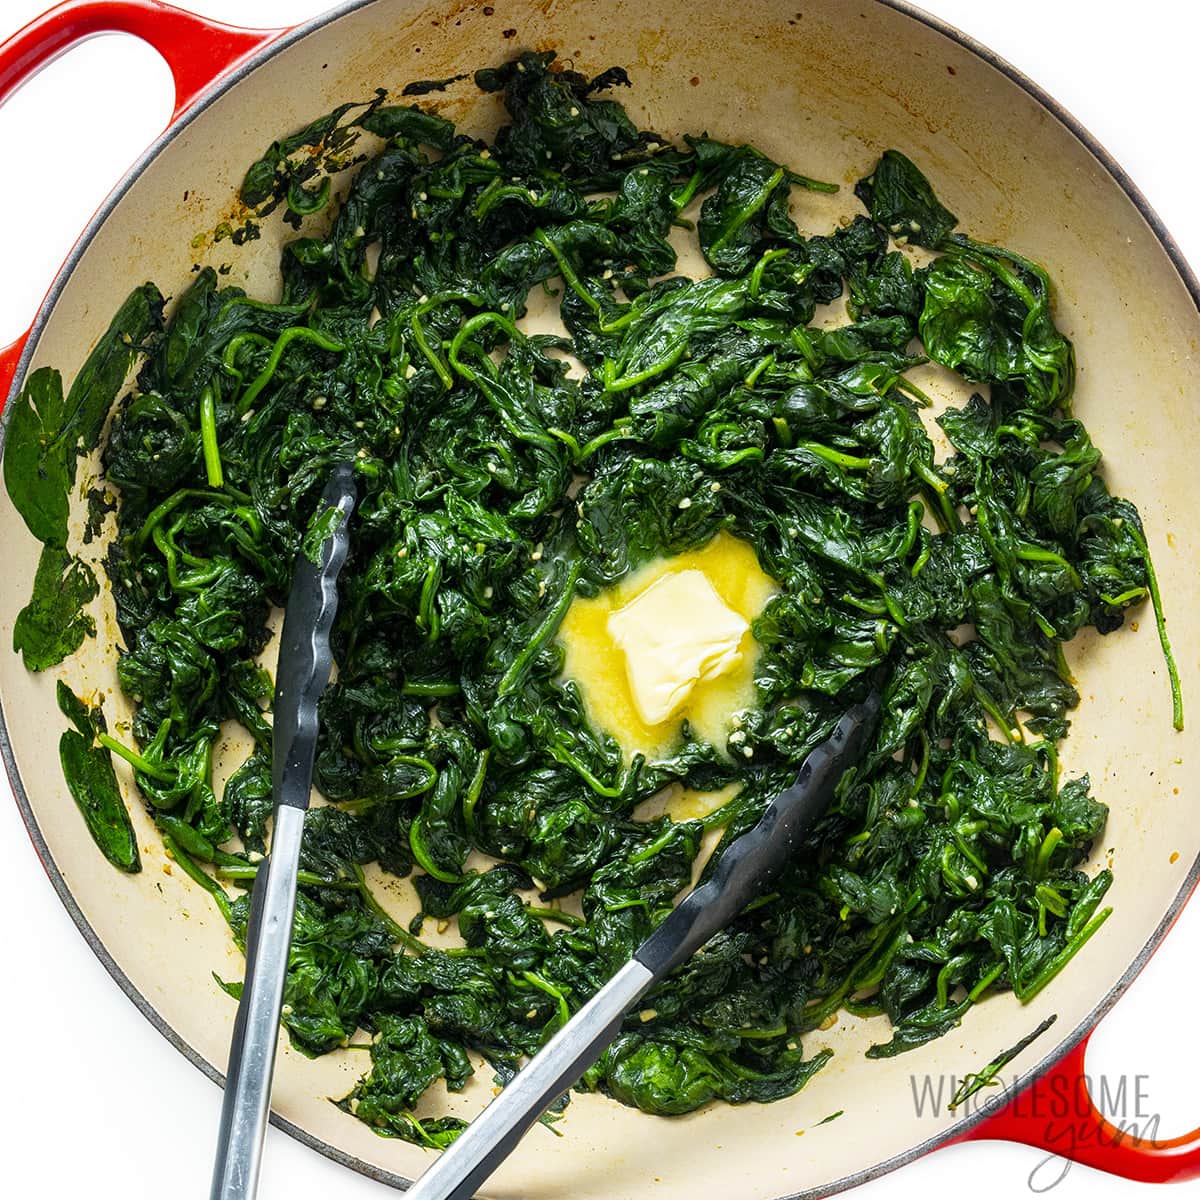 Butter added to the center of the spinach.